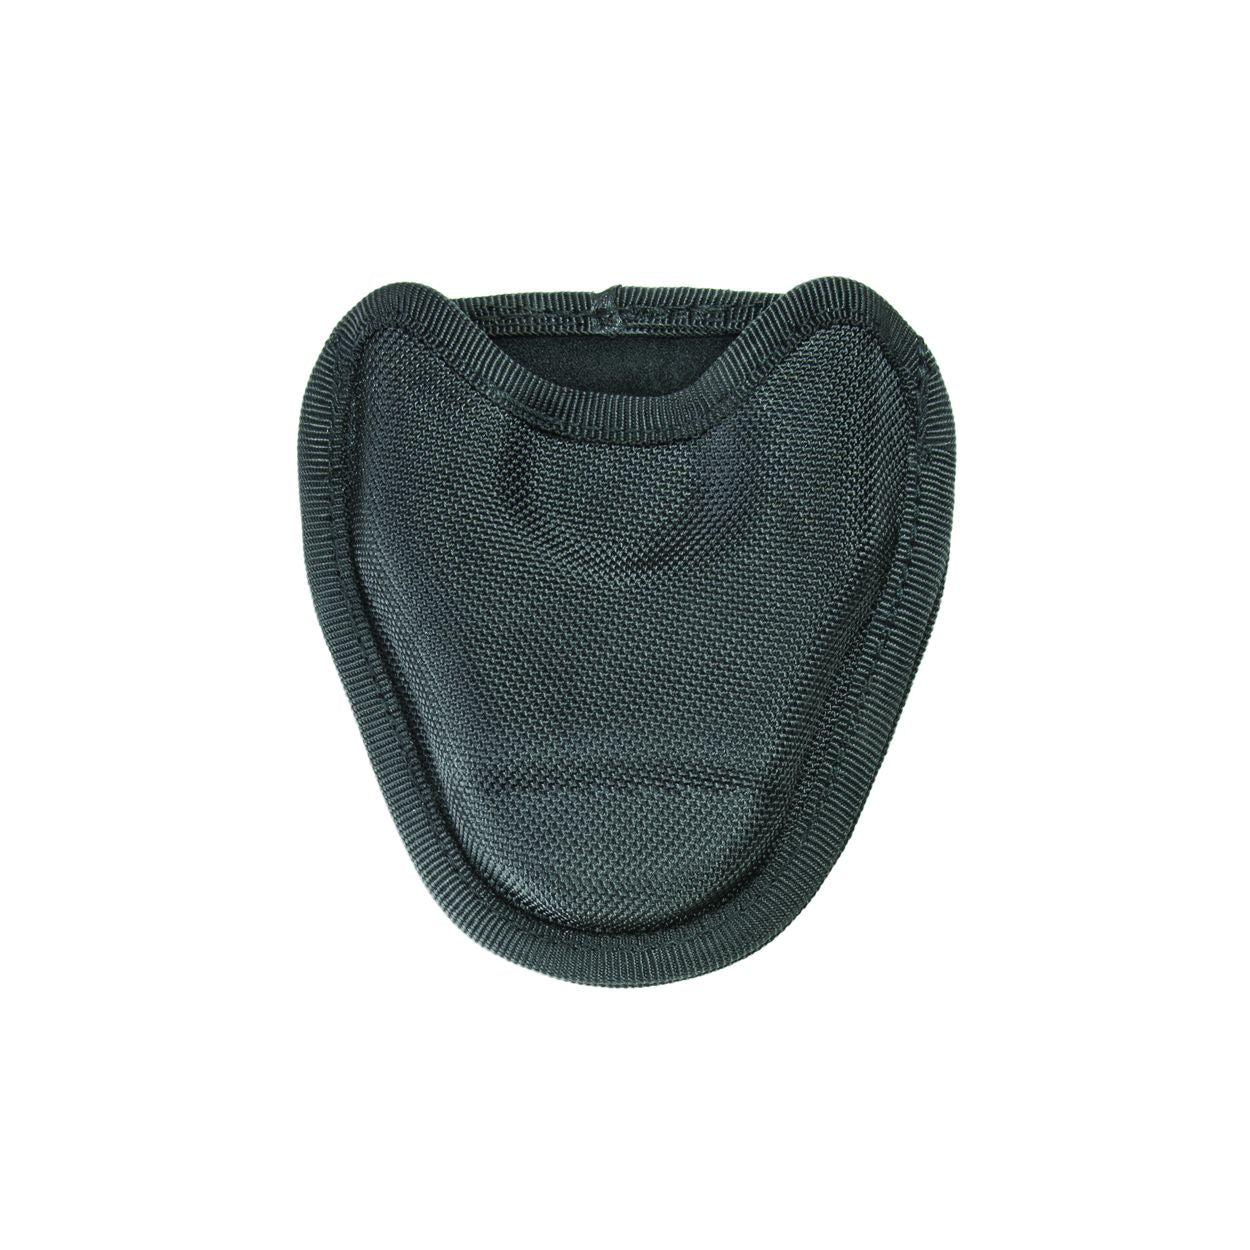 Handcuff Case - Open - Large